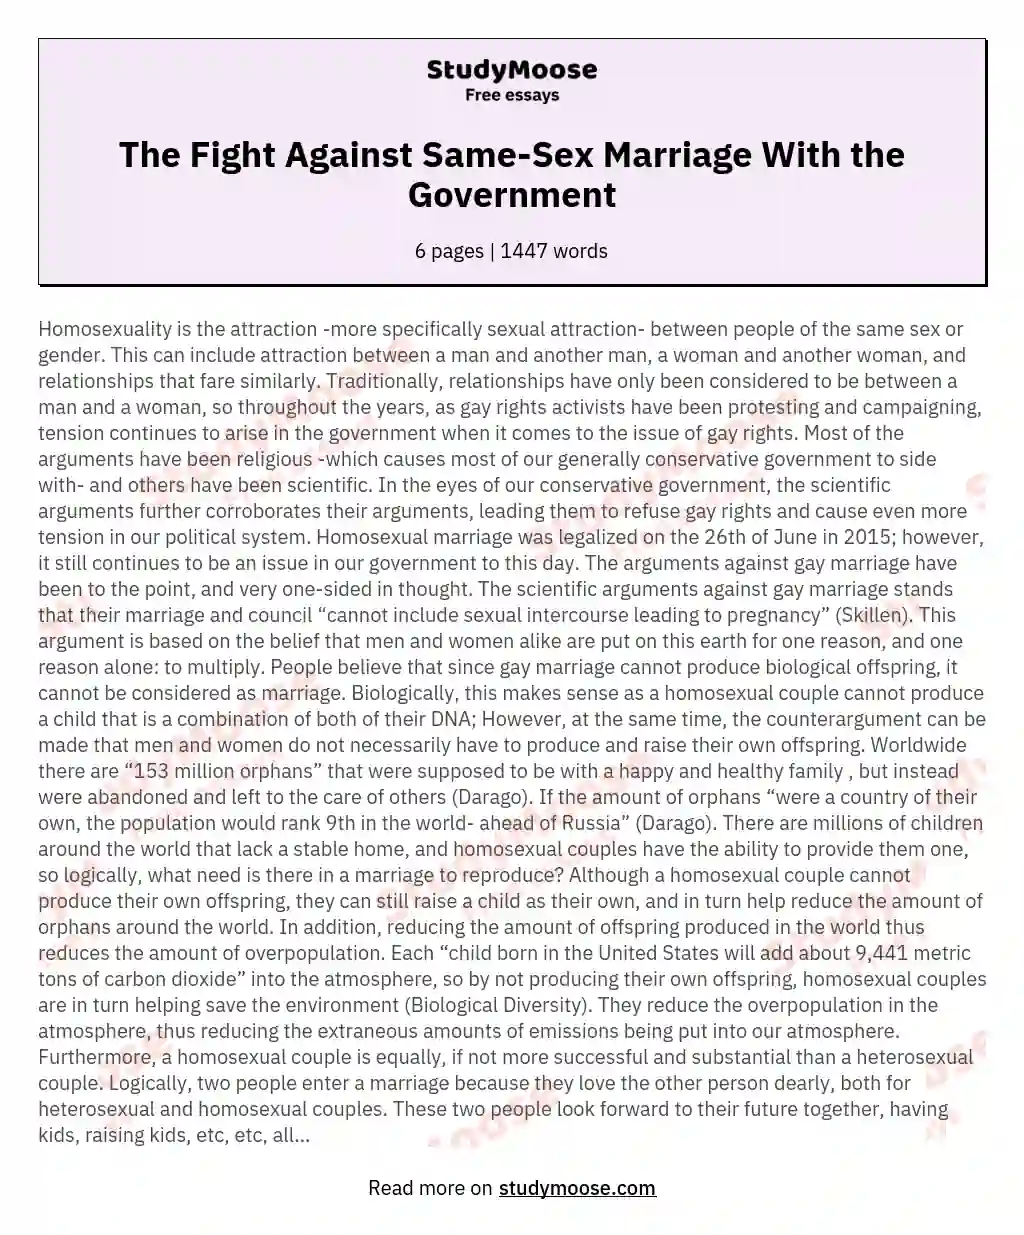 The Fight Against Same-Sex Marriage With the Government essay